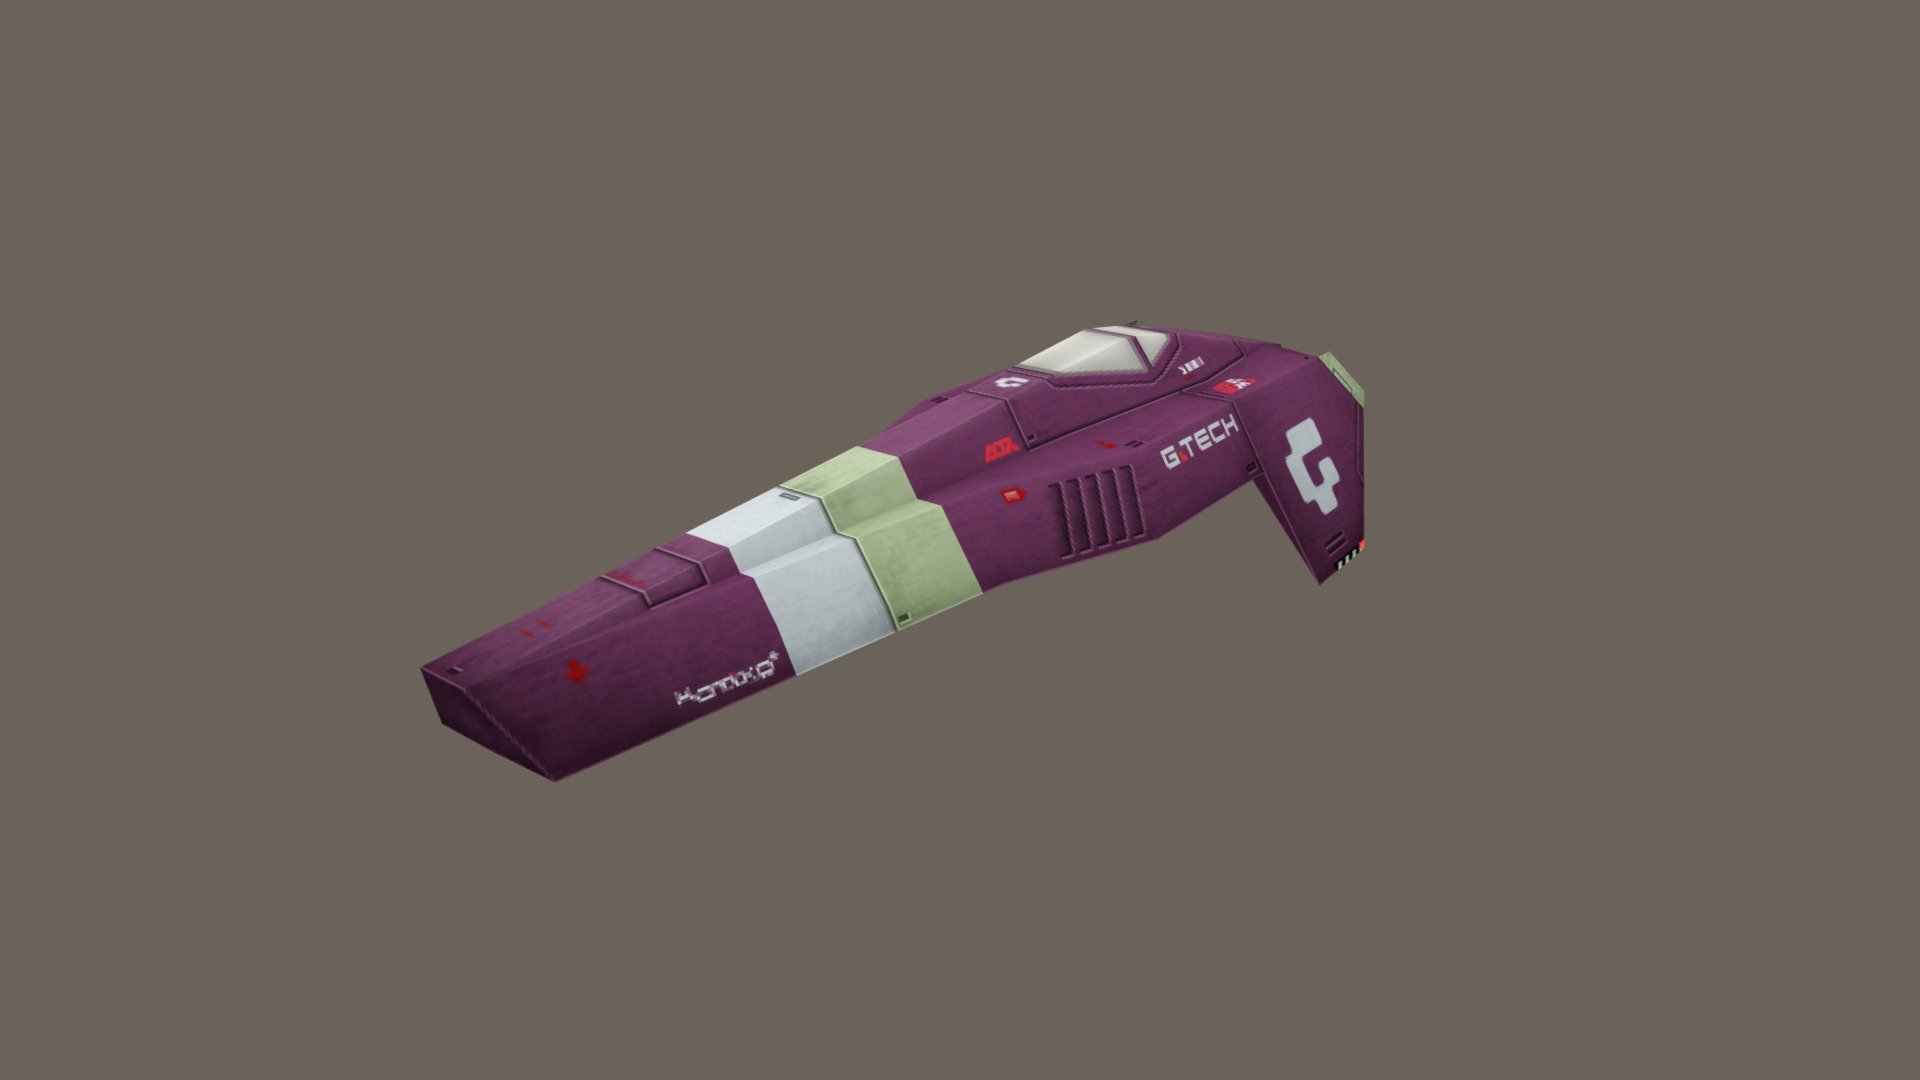 Model created as a custom ship for BallisticNG.
You can download it from the Steam Workshop: G-Tech (F7200).

This model was made using Wipeout Fusion ship as reference. The idea with this craft was to create a model that could have raced with the other Wip3out ships, like if the team had participated to the F7200 AG Racing League 3d model